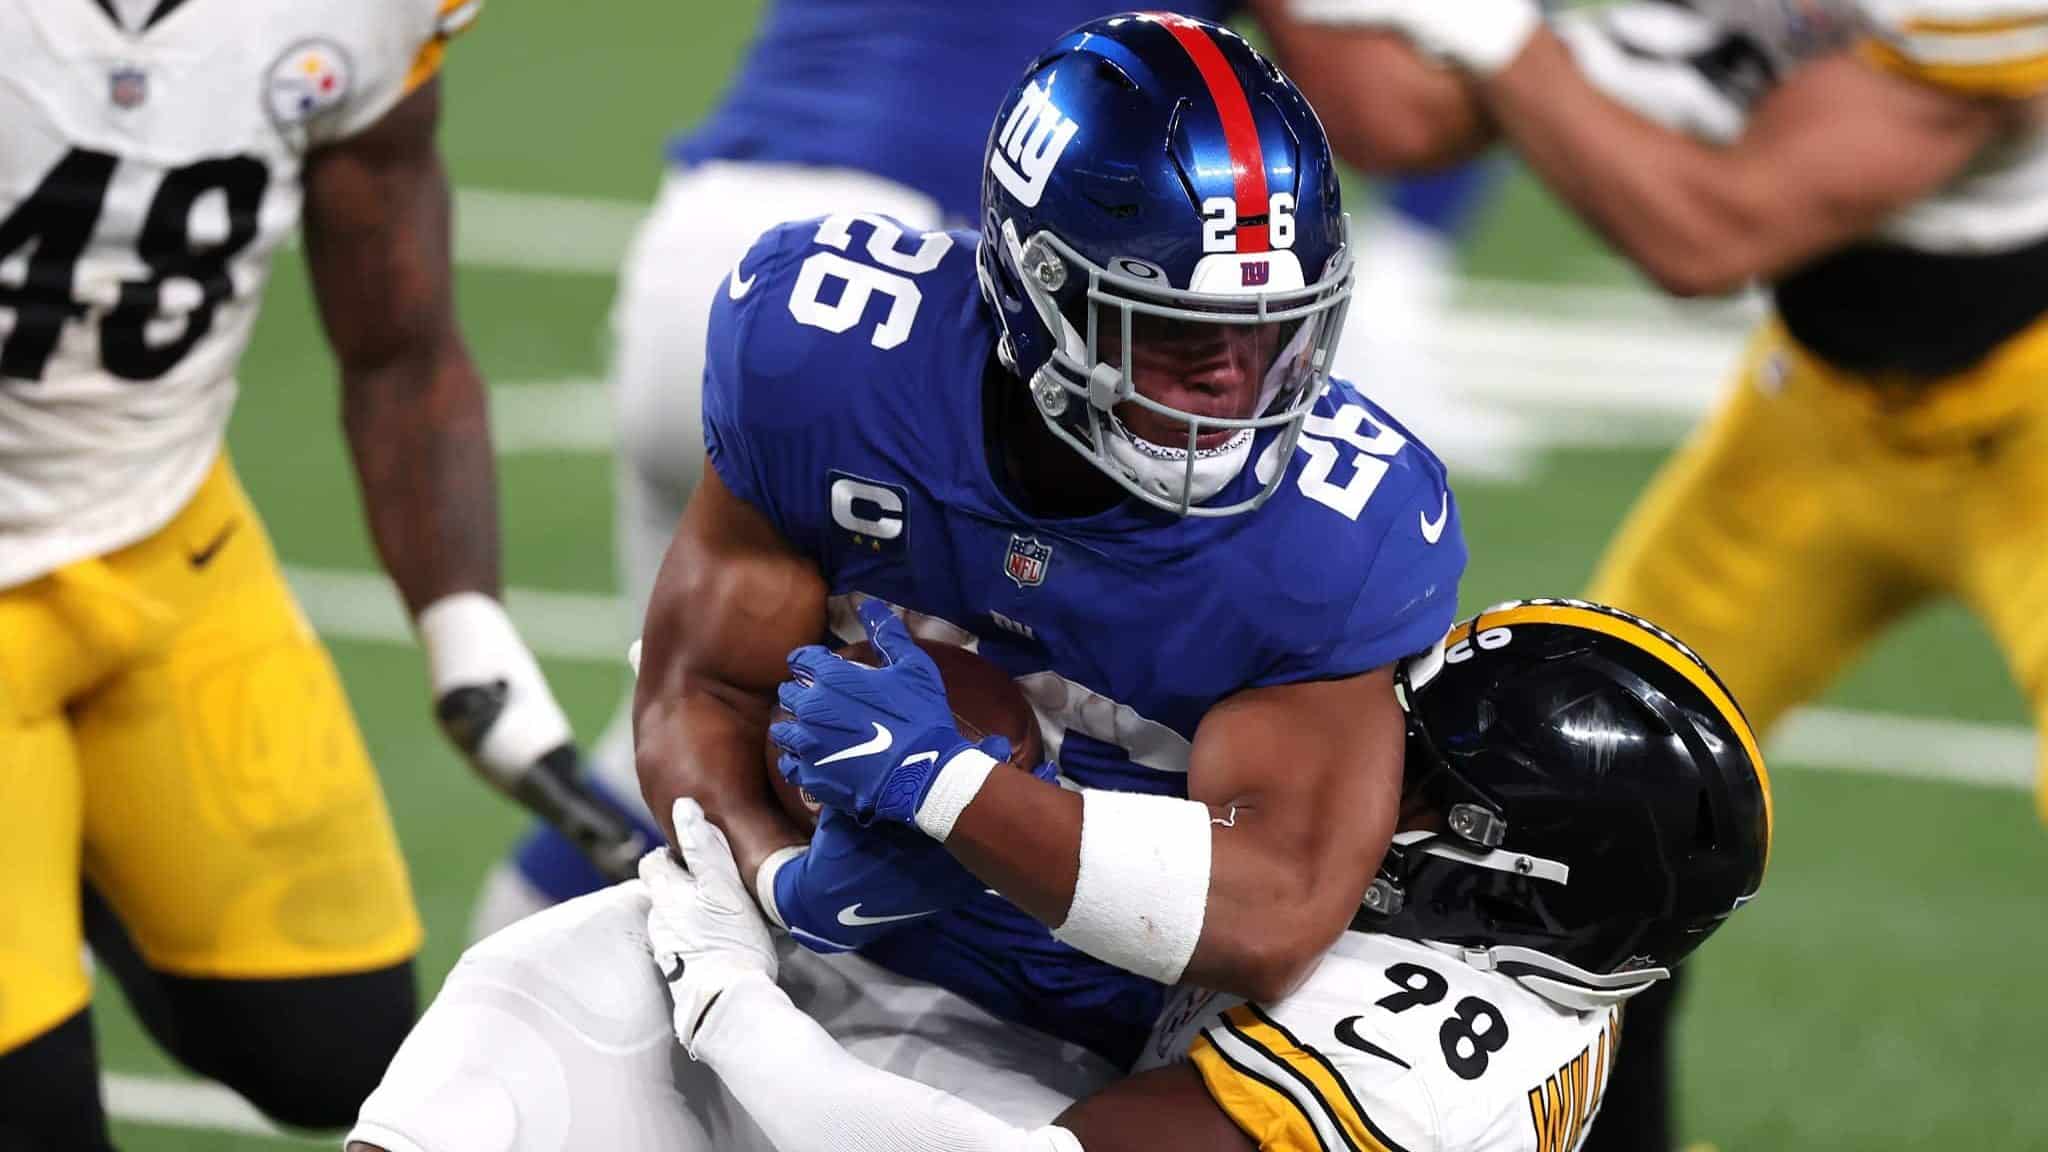 EAST RUTHERFORD, NEW JERSEY - SEPTEMBER 14: Saquon Barkley #26 of the New York Giants gets tackled by Vince Williams #98 of the Pittsburgh Steelers during the third quarter in the game at MetLife Stadium on September 14, 2020 in East Rutherford, New Jersey.